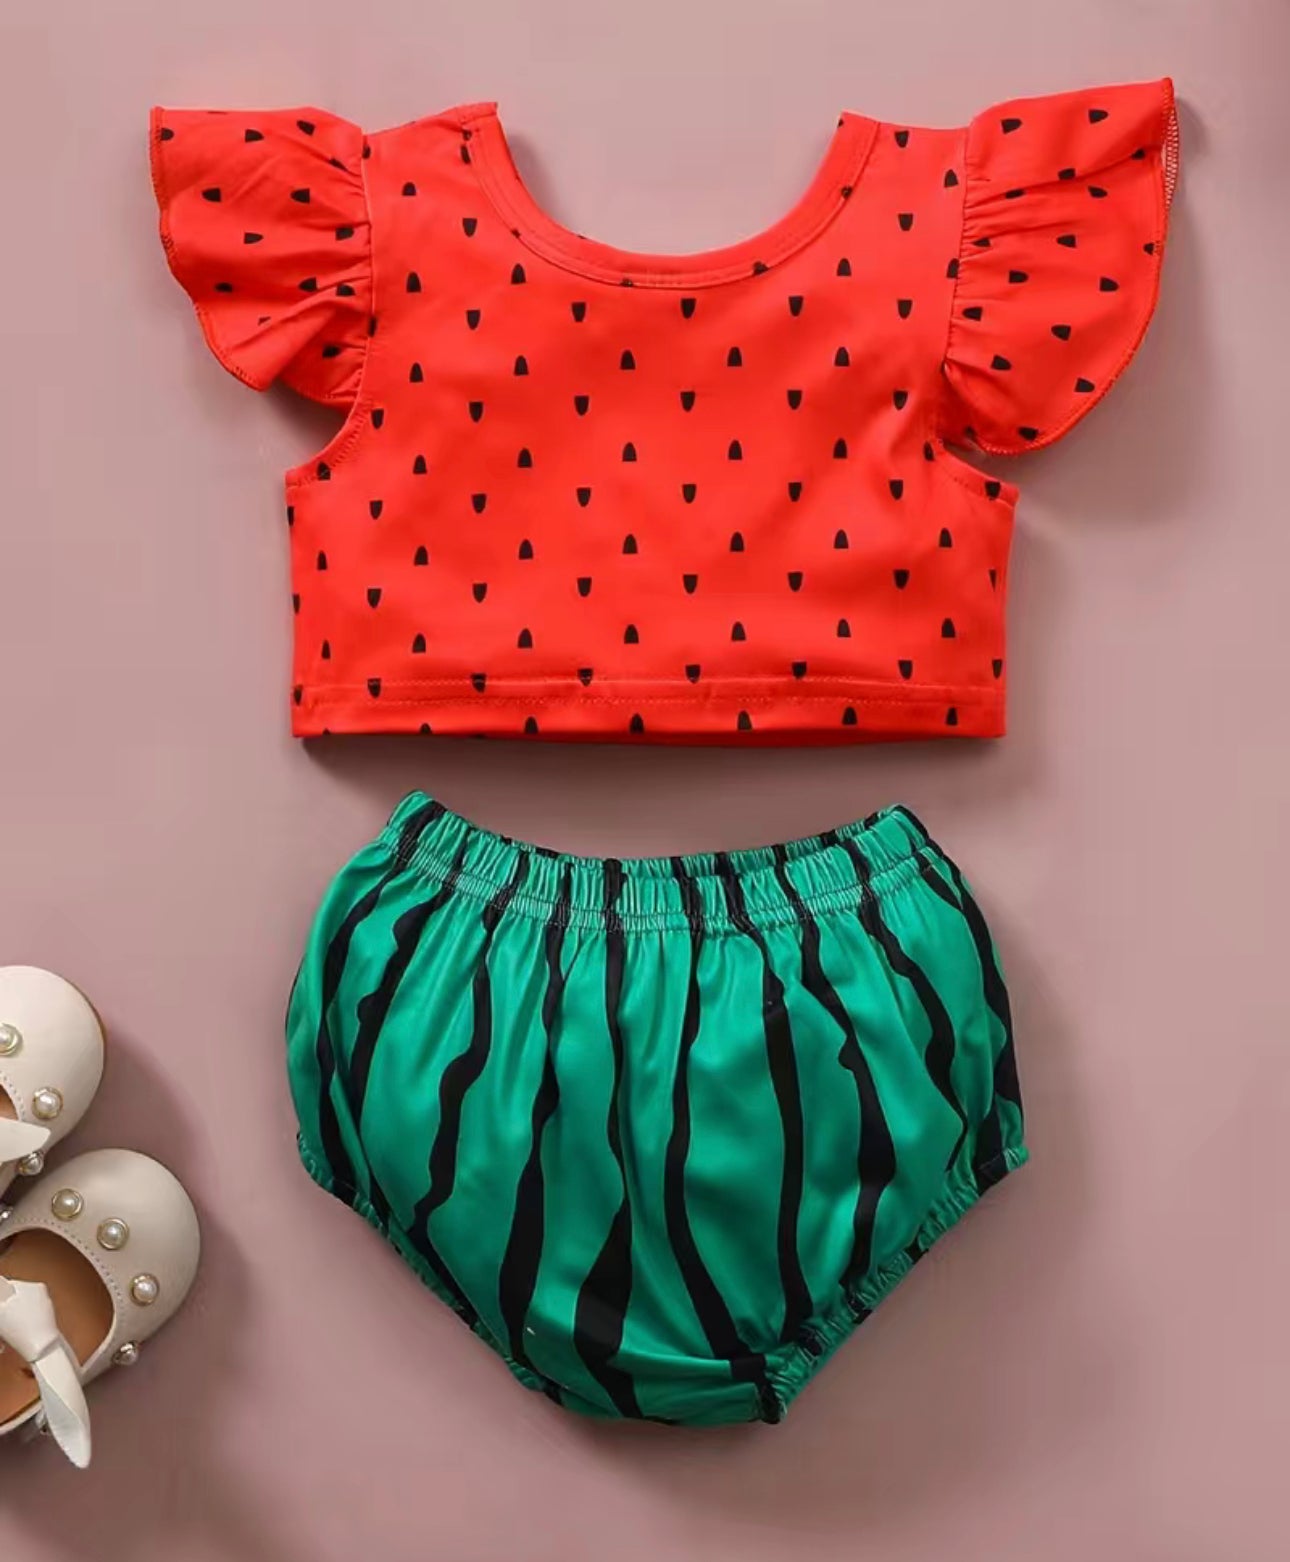 Infant Watermelon Print Outfit